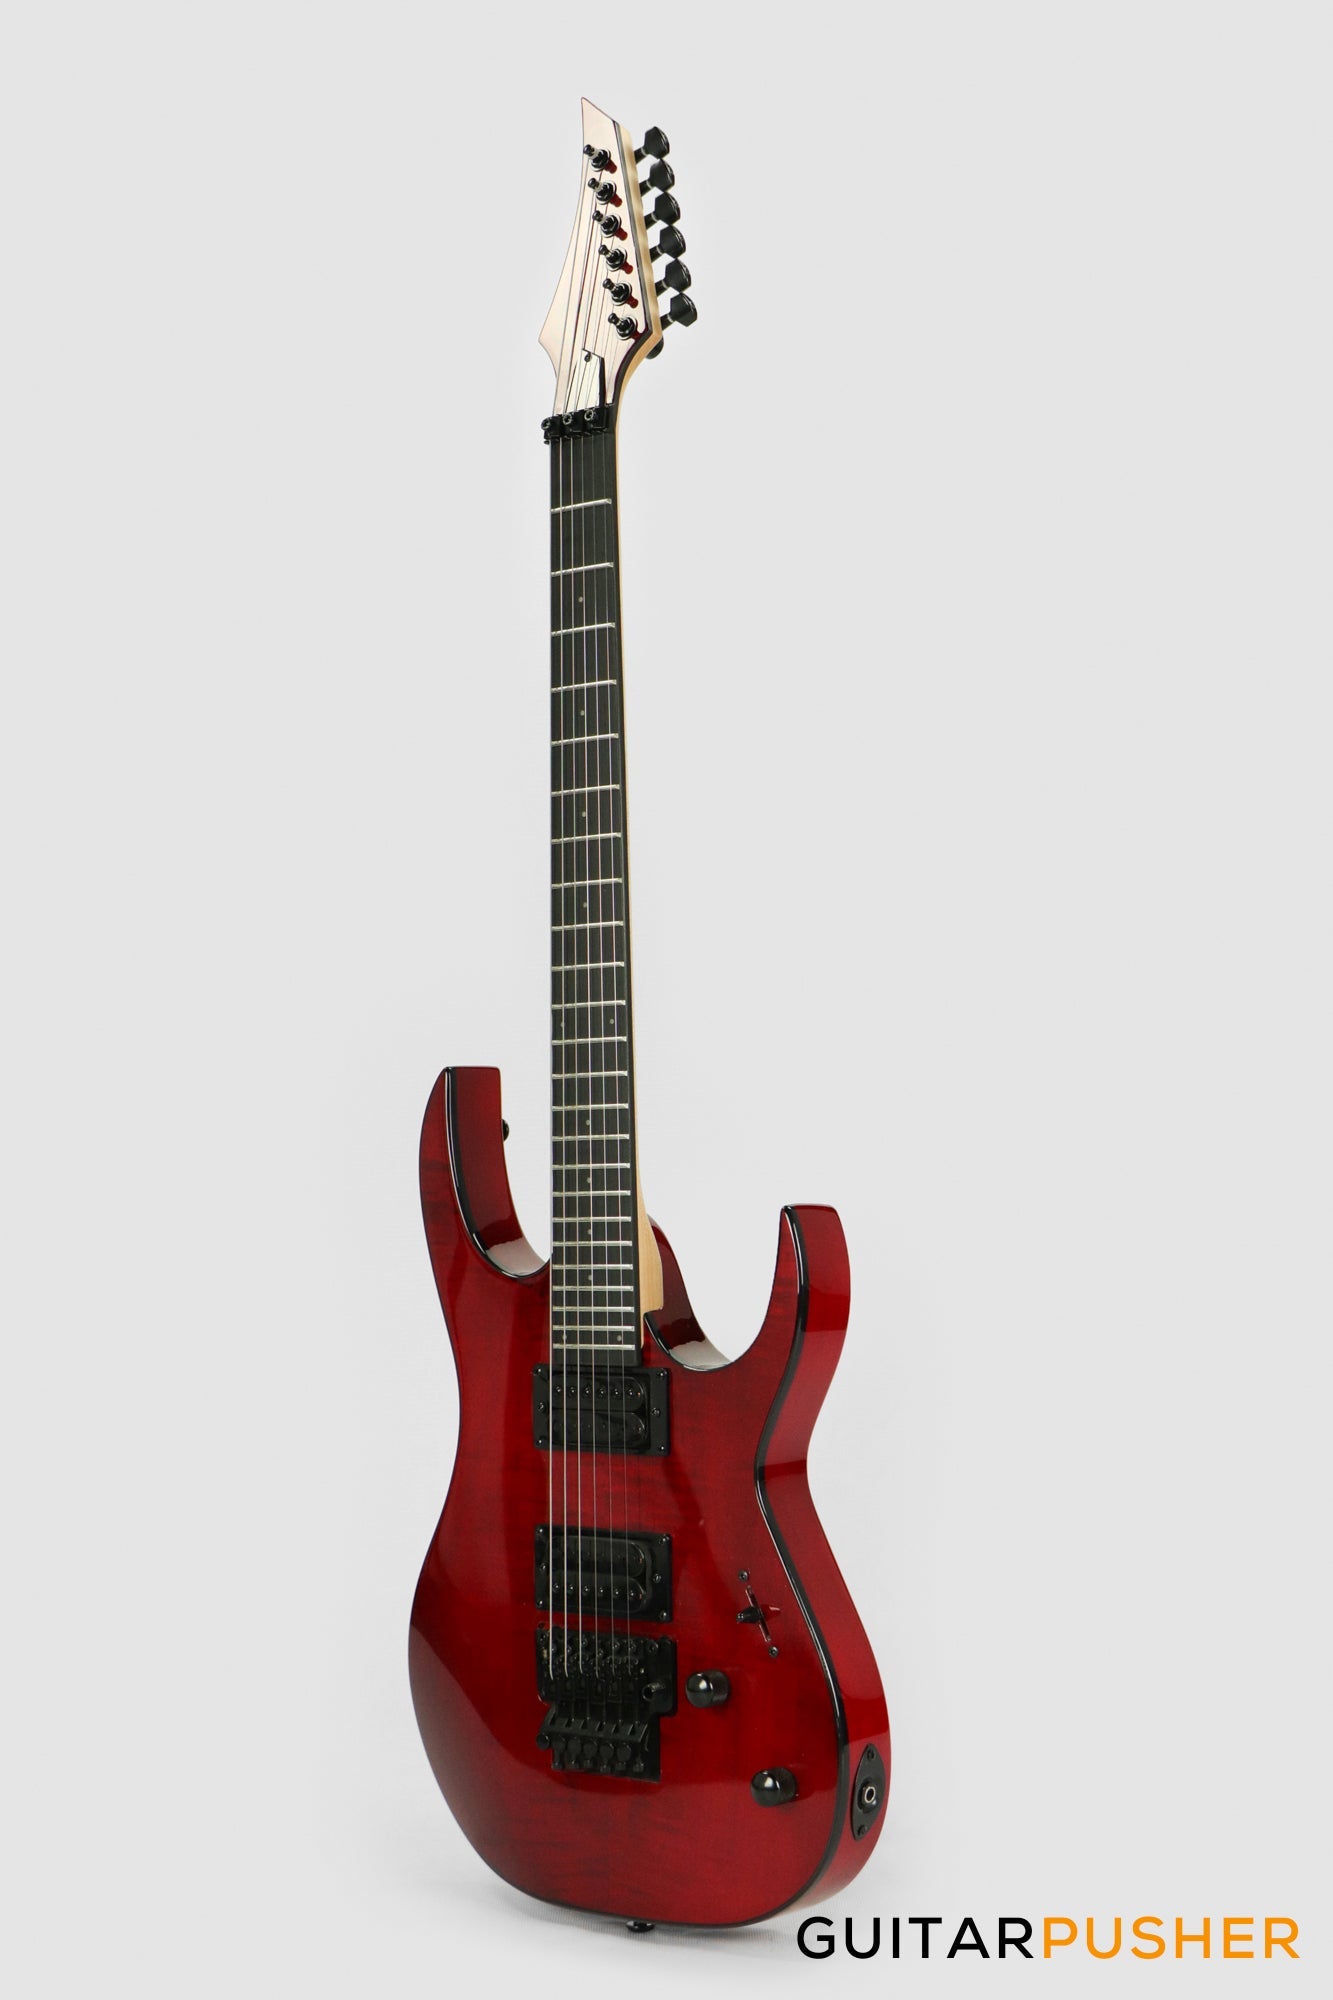 S by Solar SB4.6FRFBR-E Flame Blood Red Electric Guitar w/ Floyd Rose